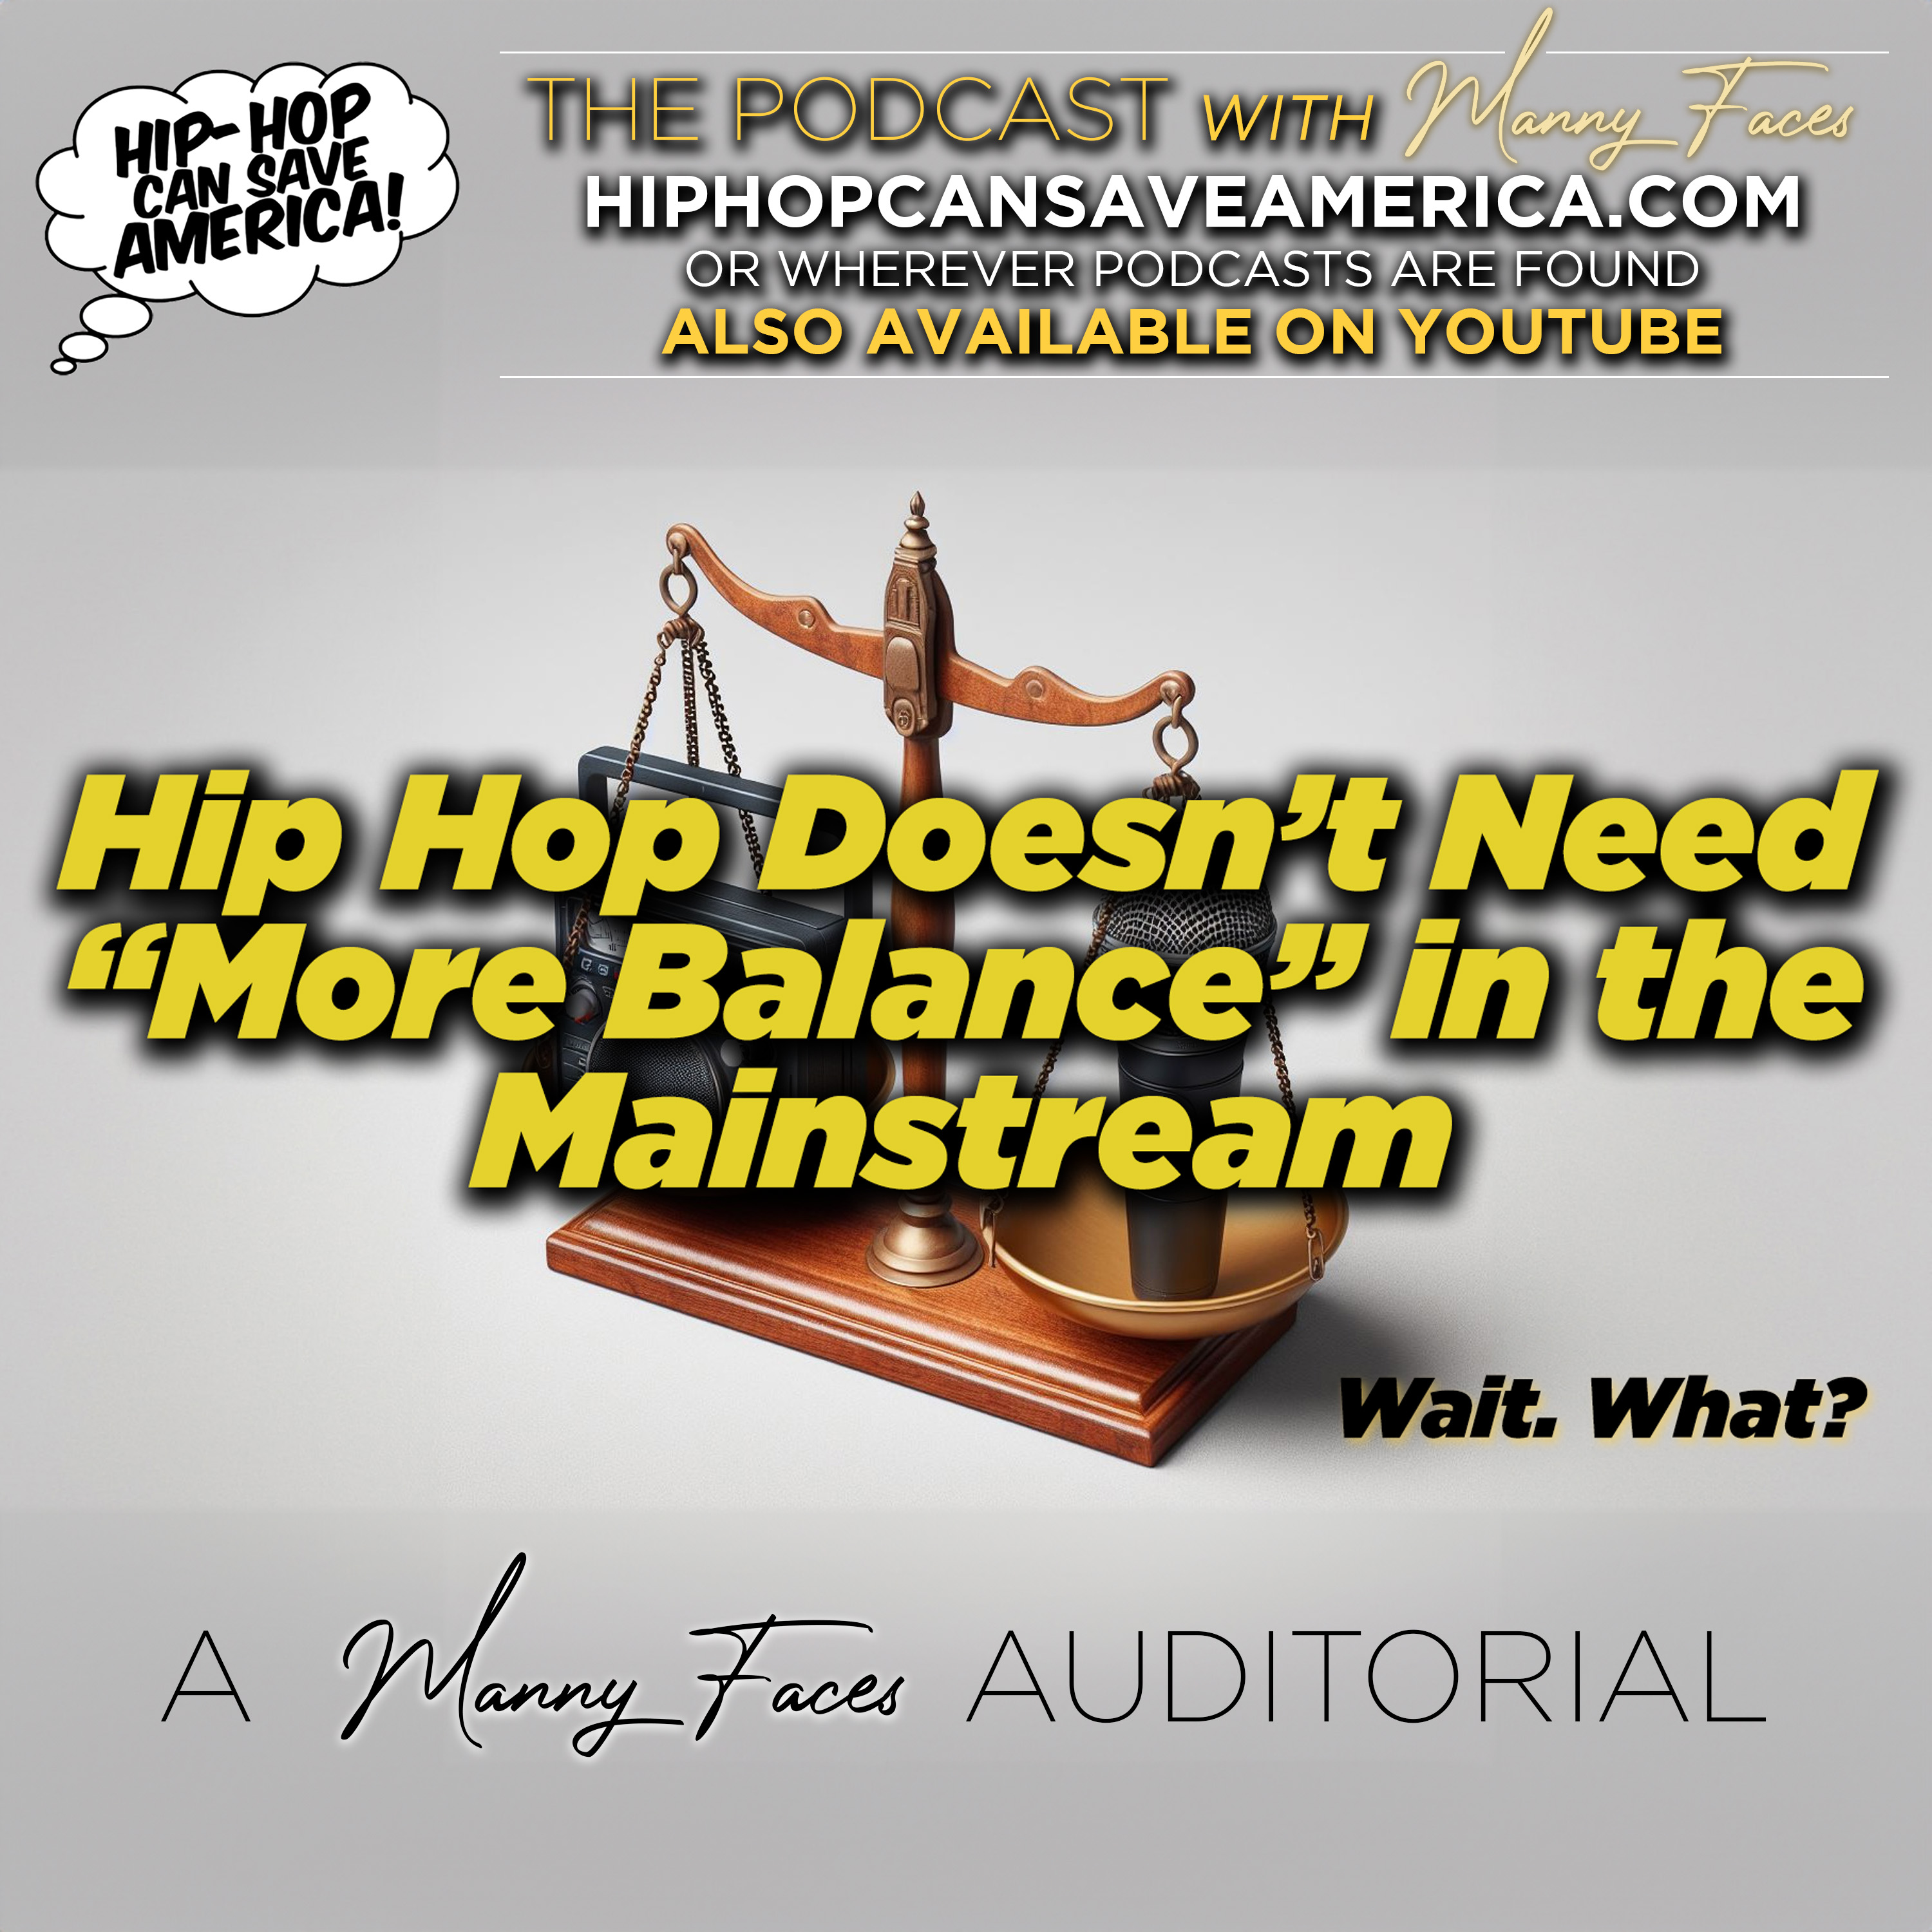 Hip Hop Doesn't Need 'More Balance' in the Mainstream! (Wait. What??)